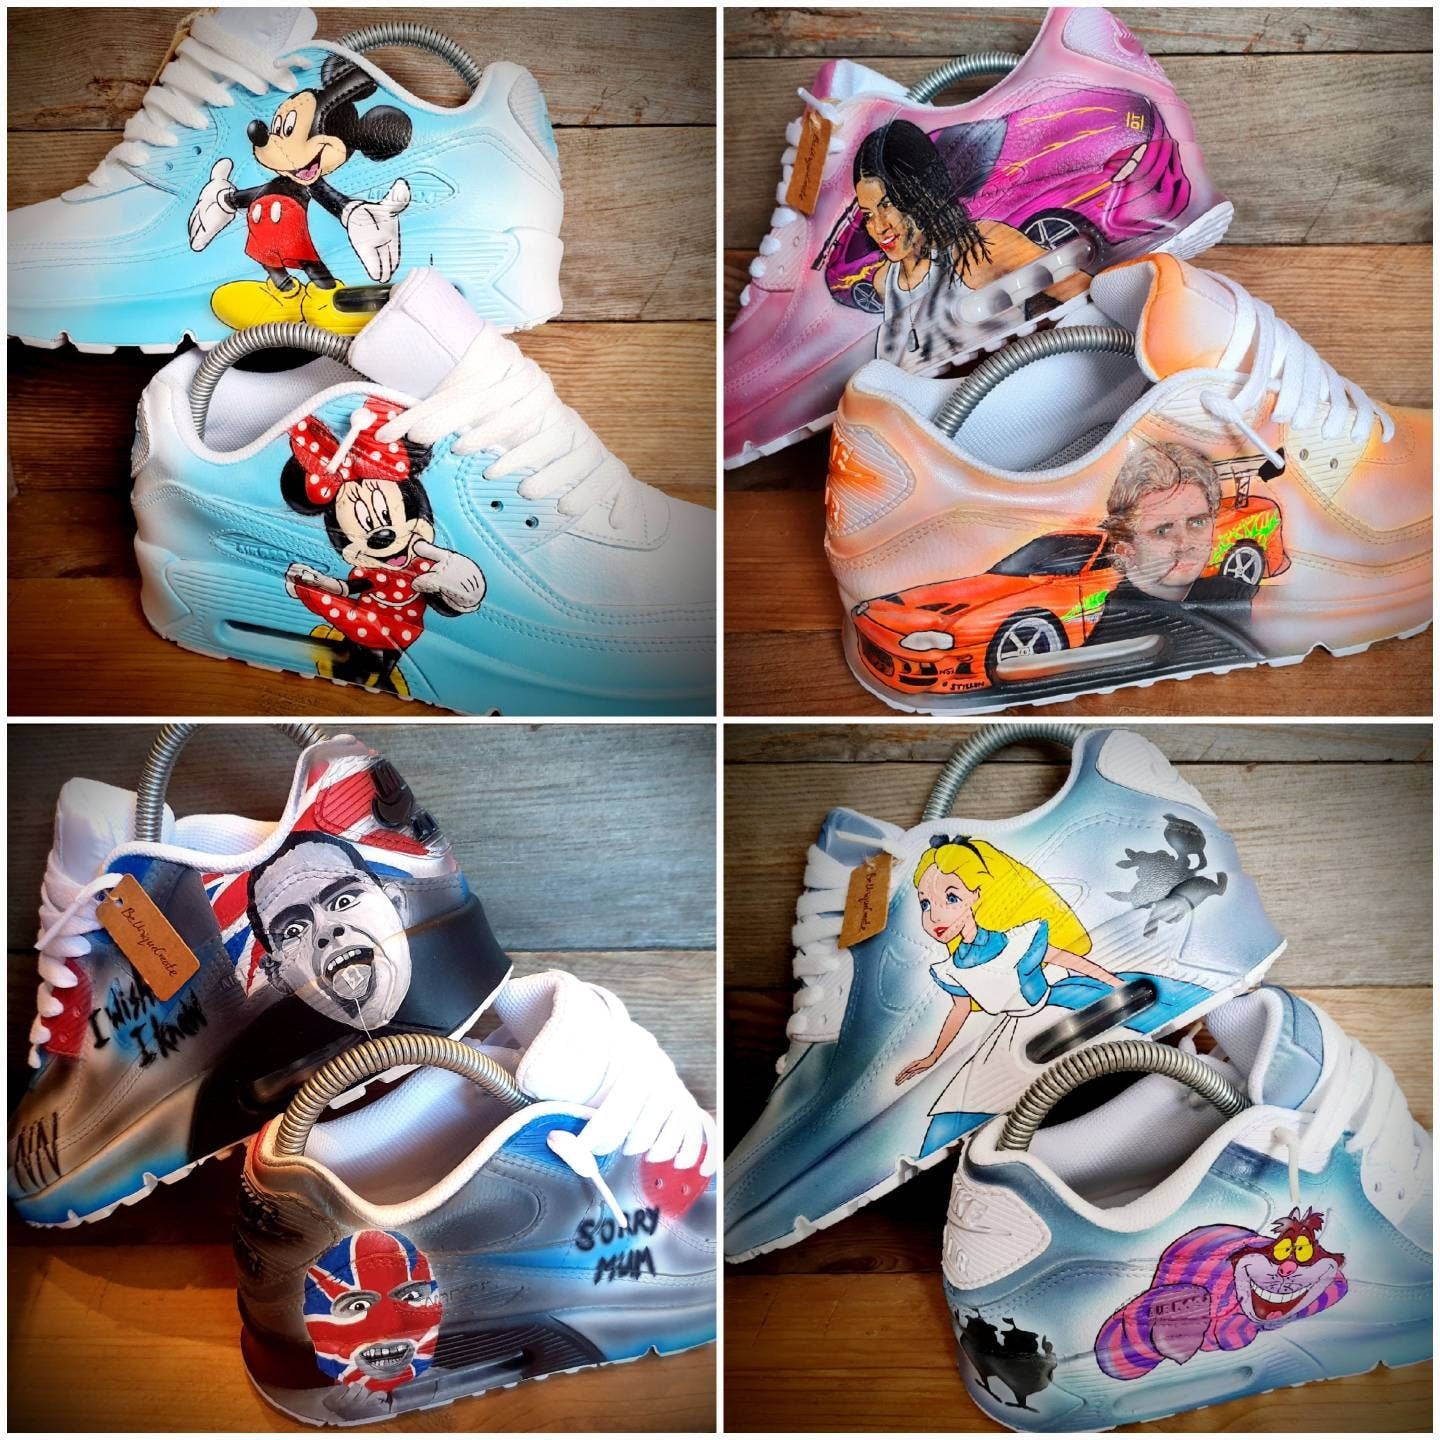 Personalised Custom Painted Air Max 90/Air Force 1/Sneakers/Shoes/Kicks/Boots/Premium/Send In Your Shoes